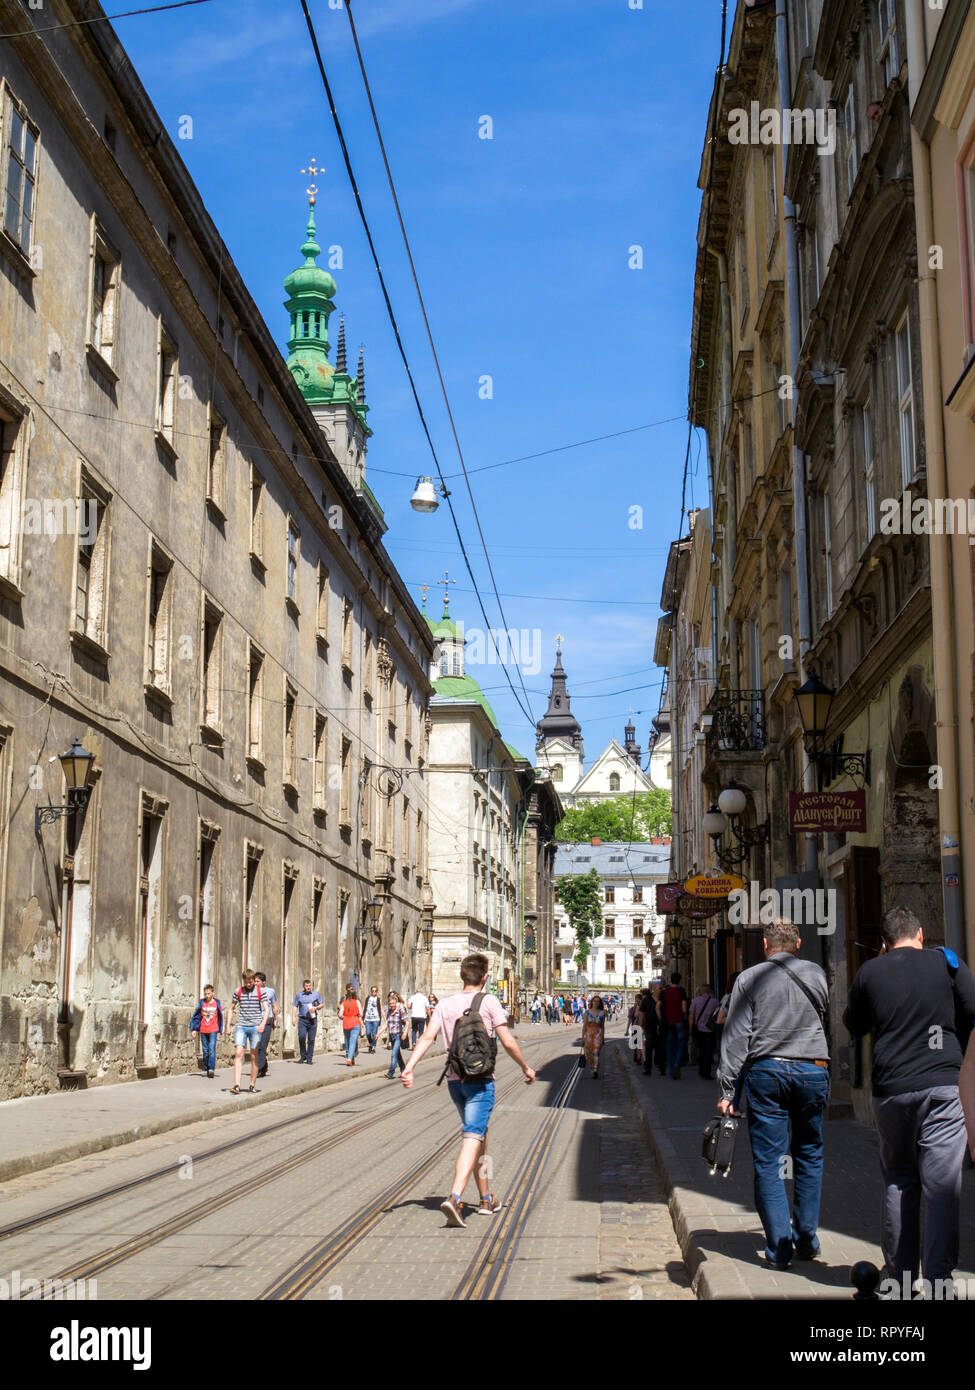 A street in the old town of Lviv, in Ukraine. Its well preserved architecture, which blends Central and Eastern European styles, and cheap prices, mak Stock Photo